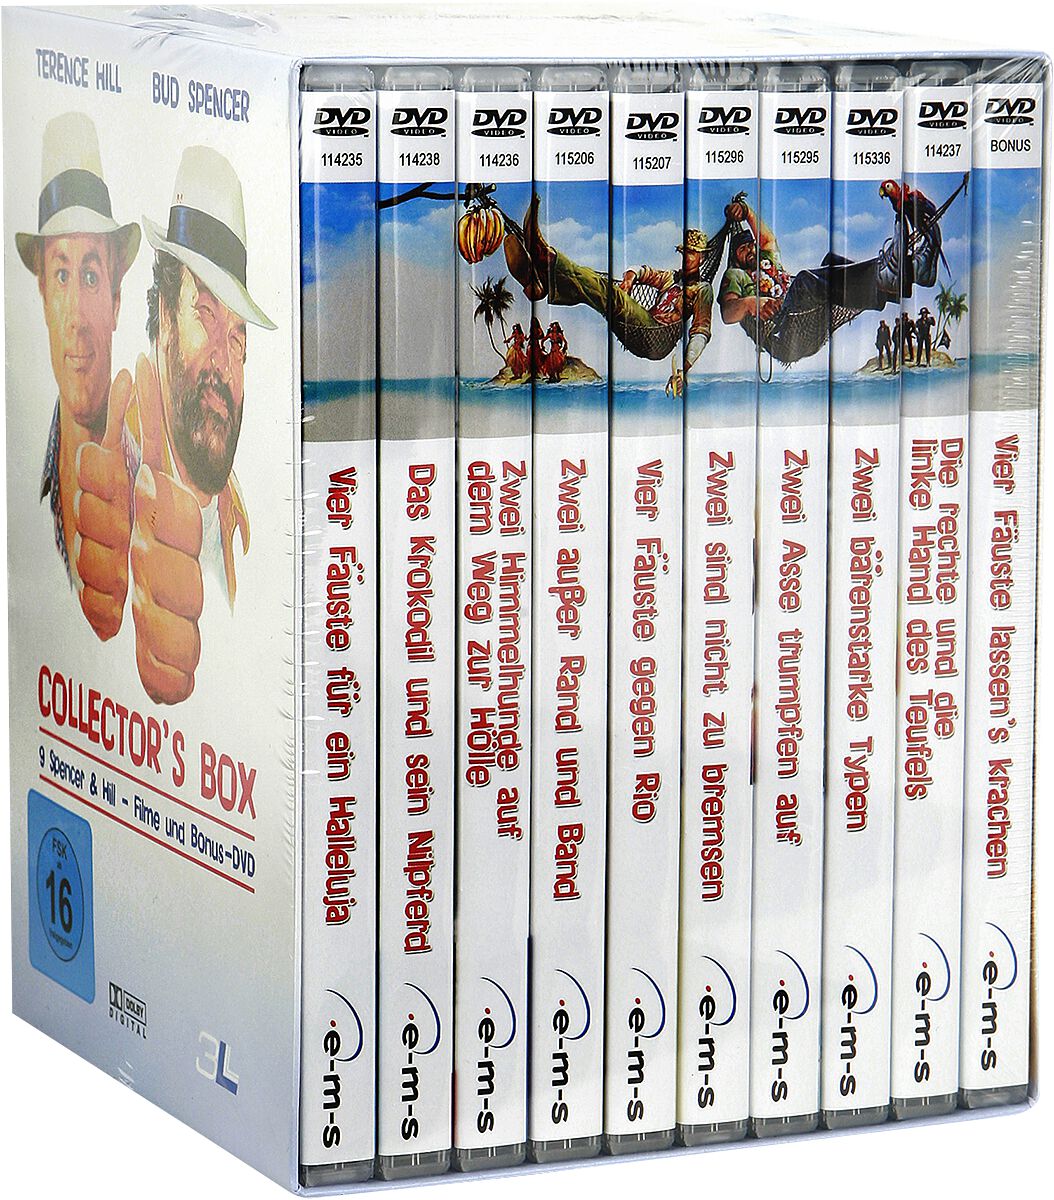 Collector's Box, Bud Spencer & Terence Hill DVD